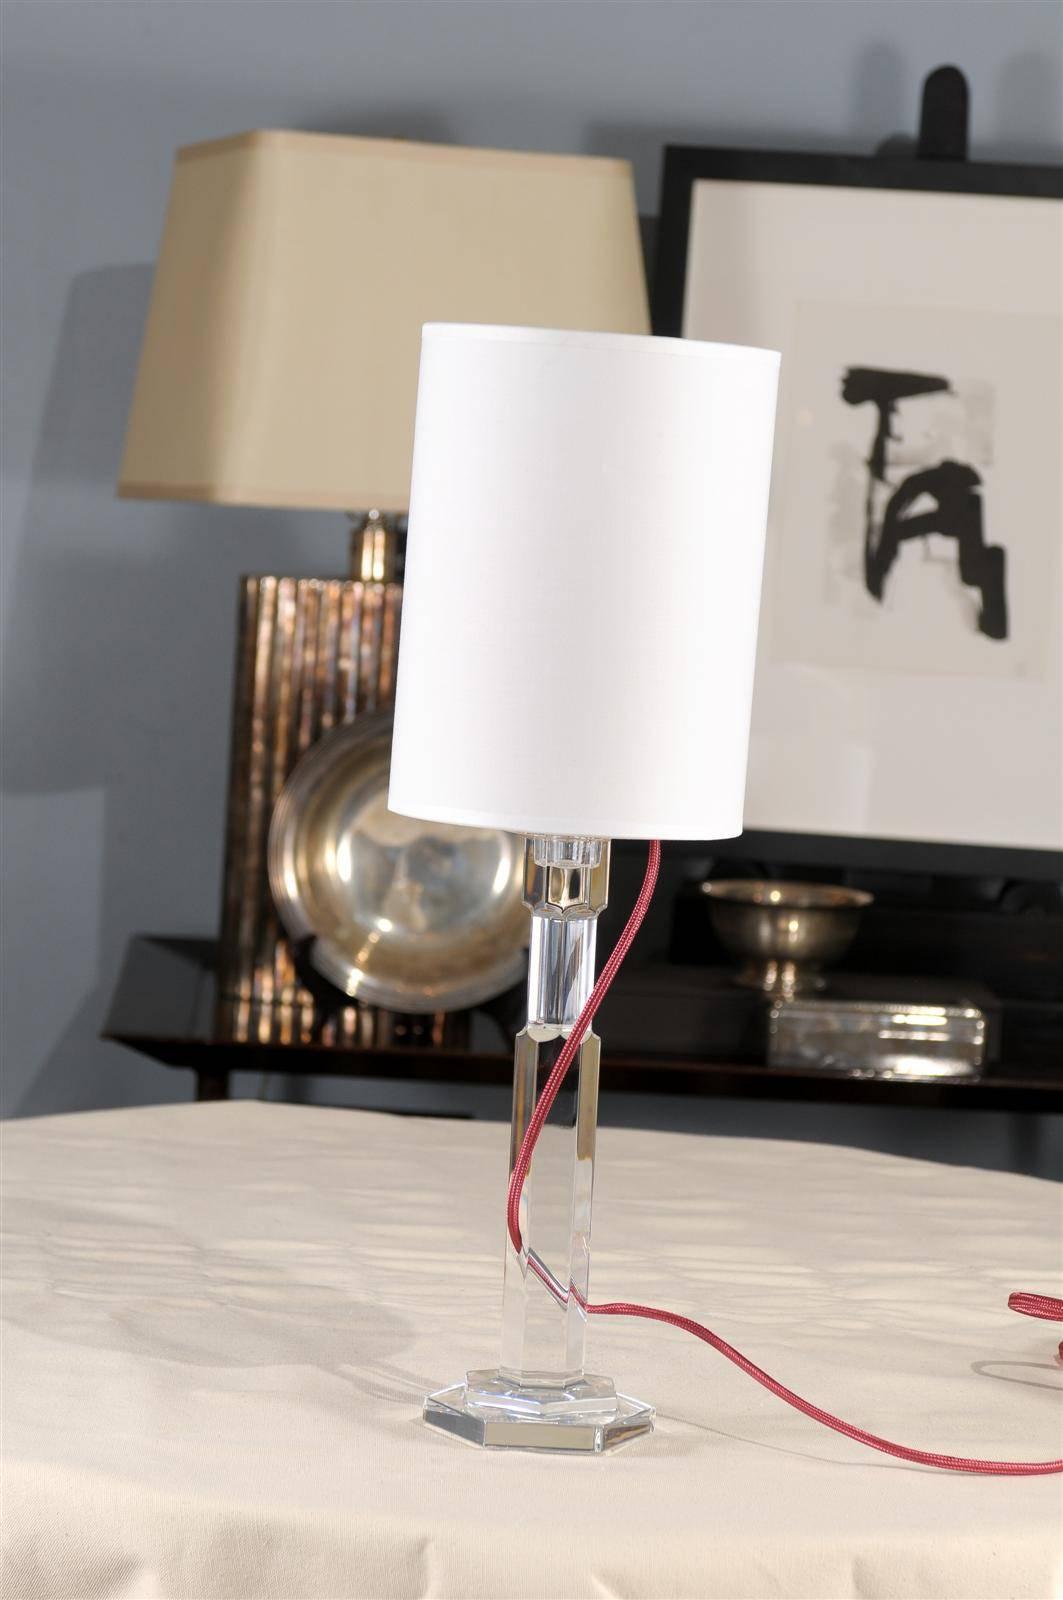 Baccarat Abysse table lamp (# 2606401).

Designer Thomas Bastide.

Made in France.

Brand new, never used.

White shade.

Red wire running inside of a crystal Stand.

It's stands 20